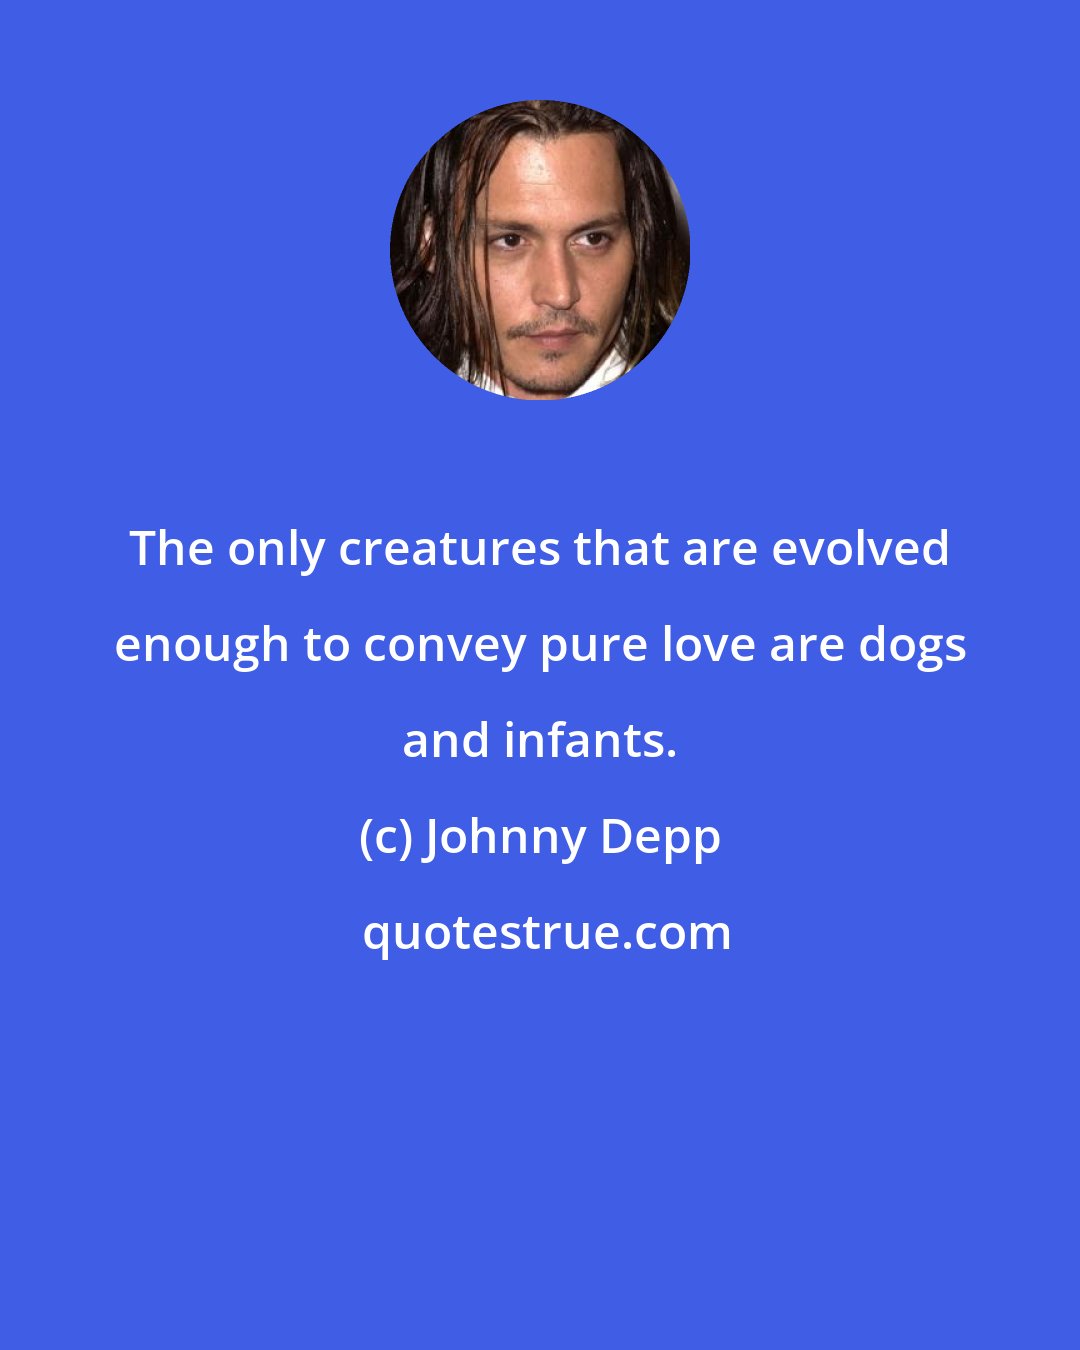 Johnny Depp: The only creatures that are evolved enough to convey pure love are dogs and infants.